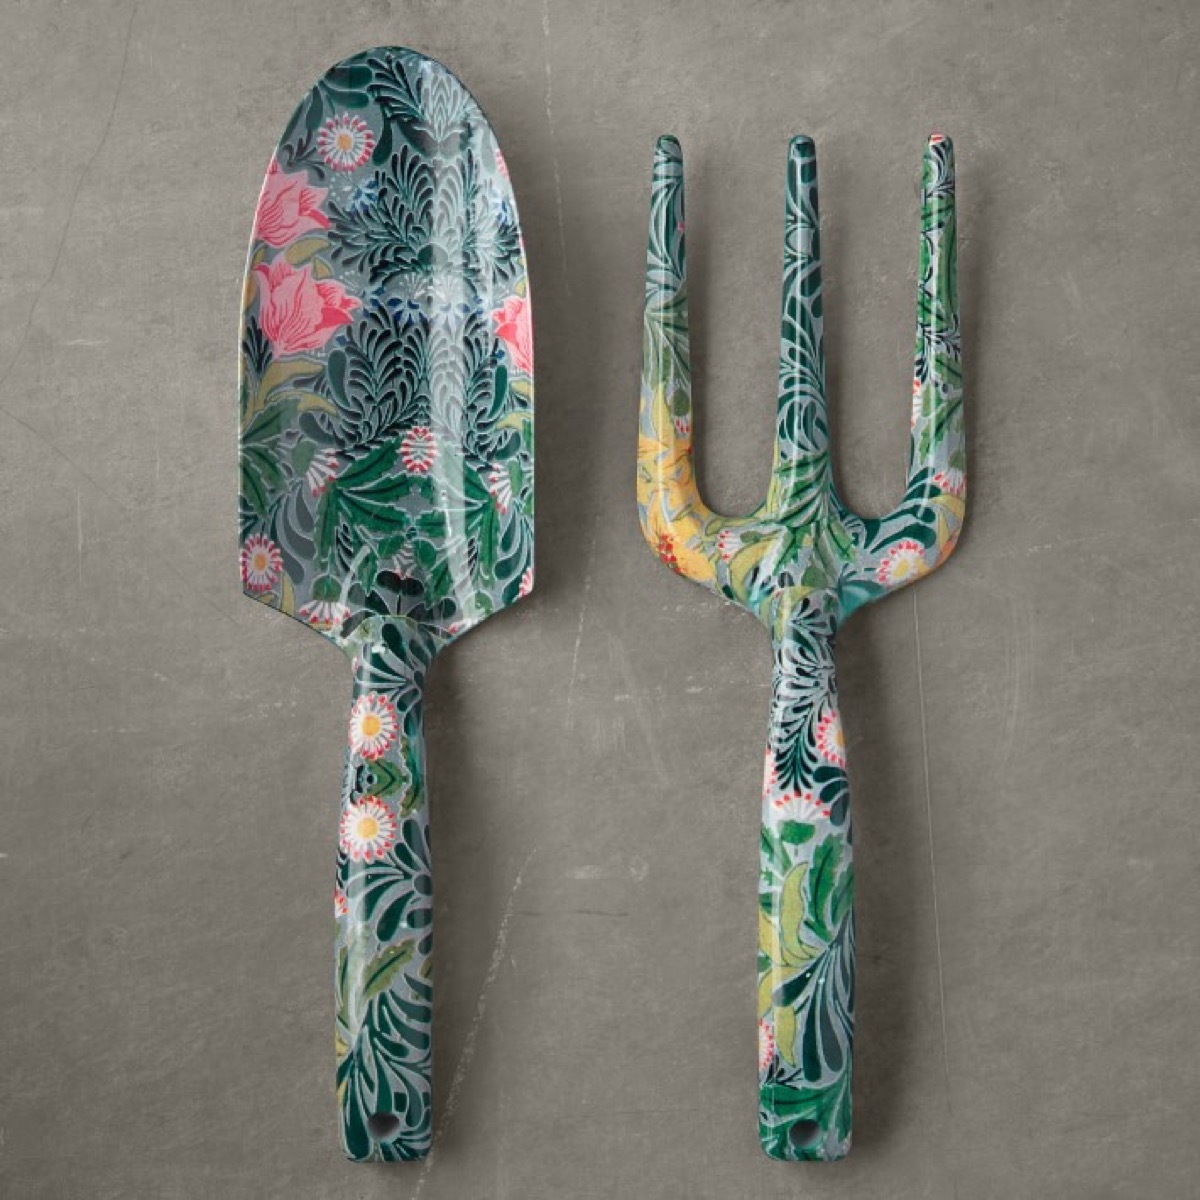 floral gardening tools from williams sonoma